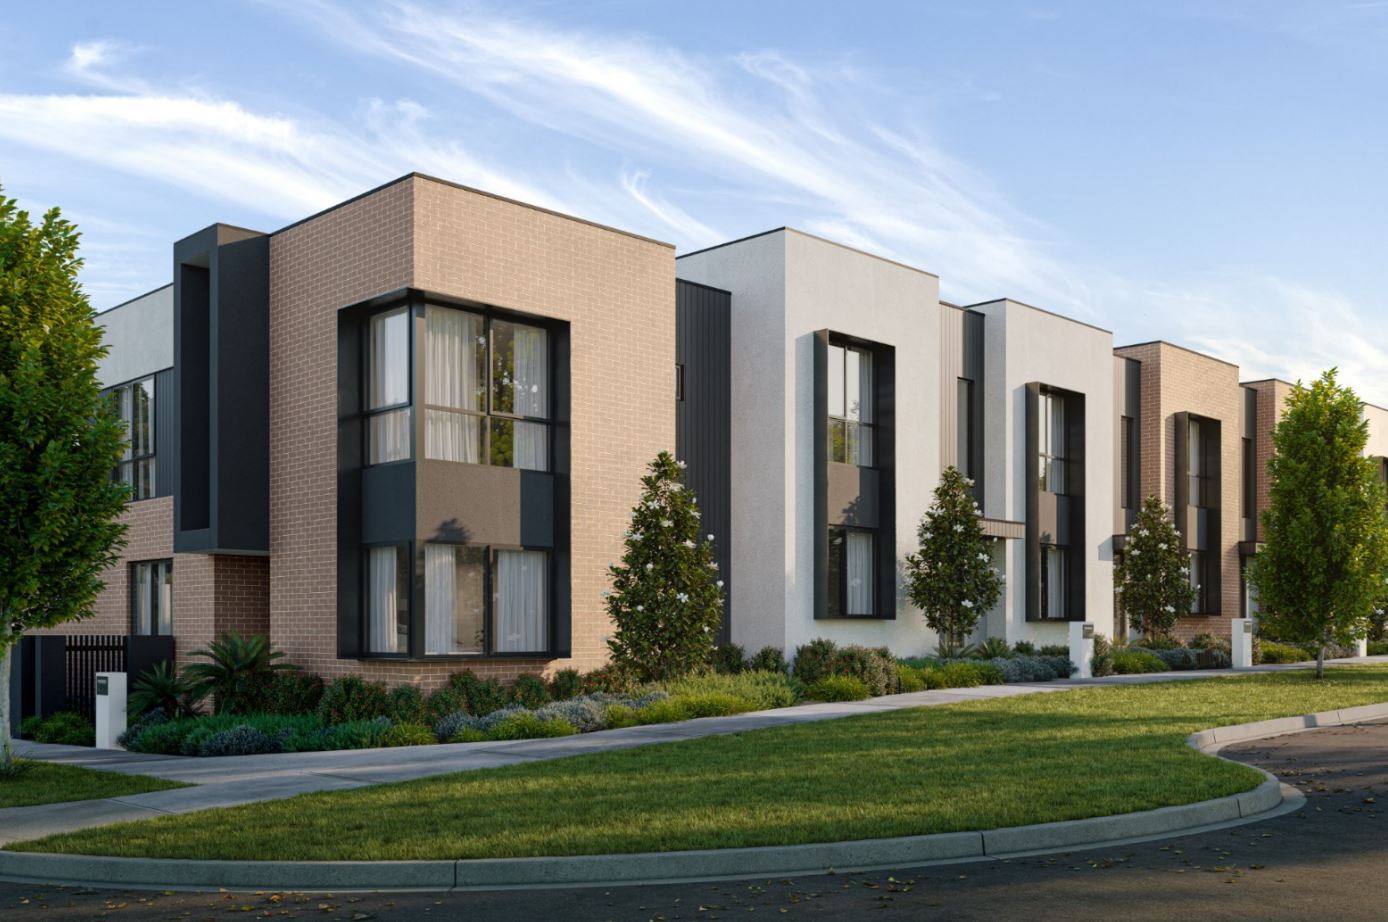 Turnkey townhouses in the heart of the community